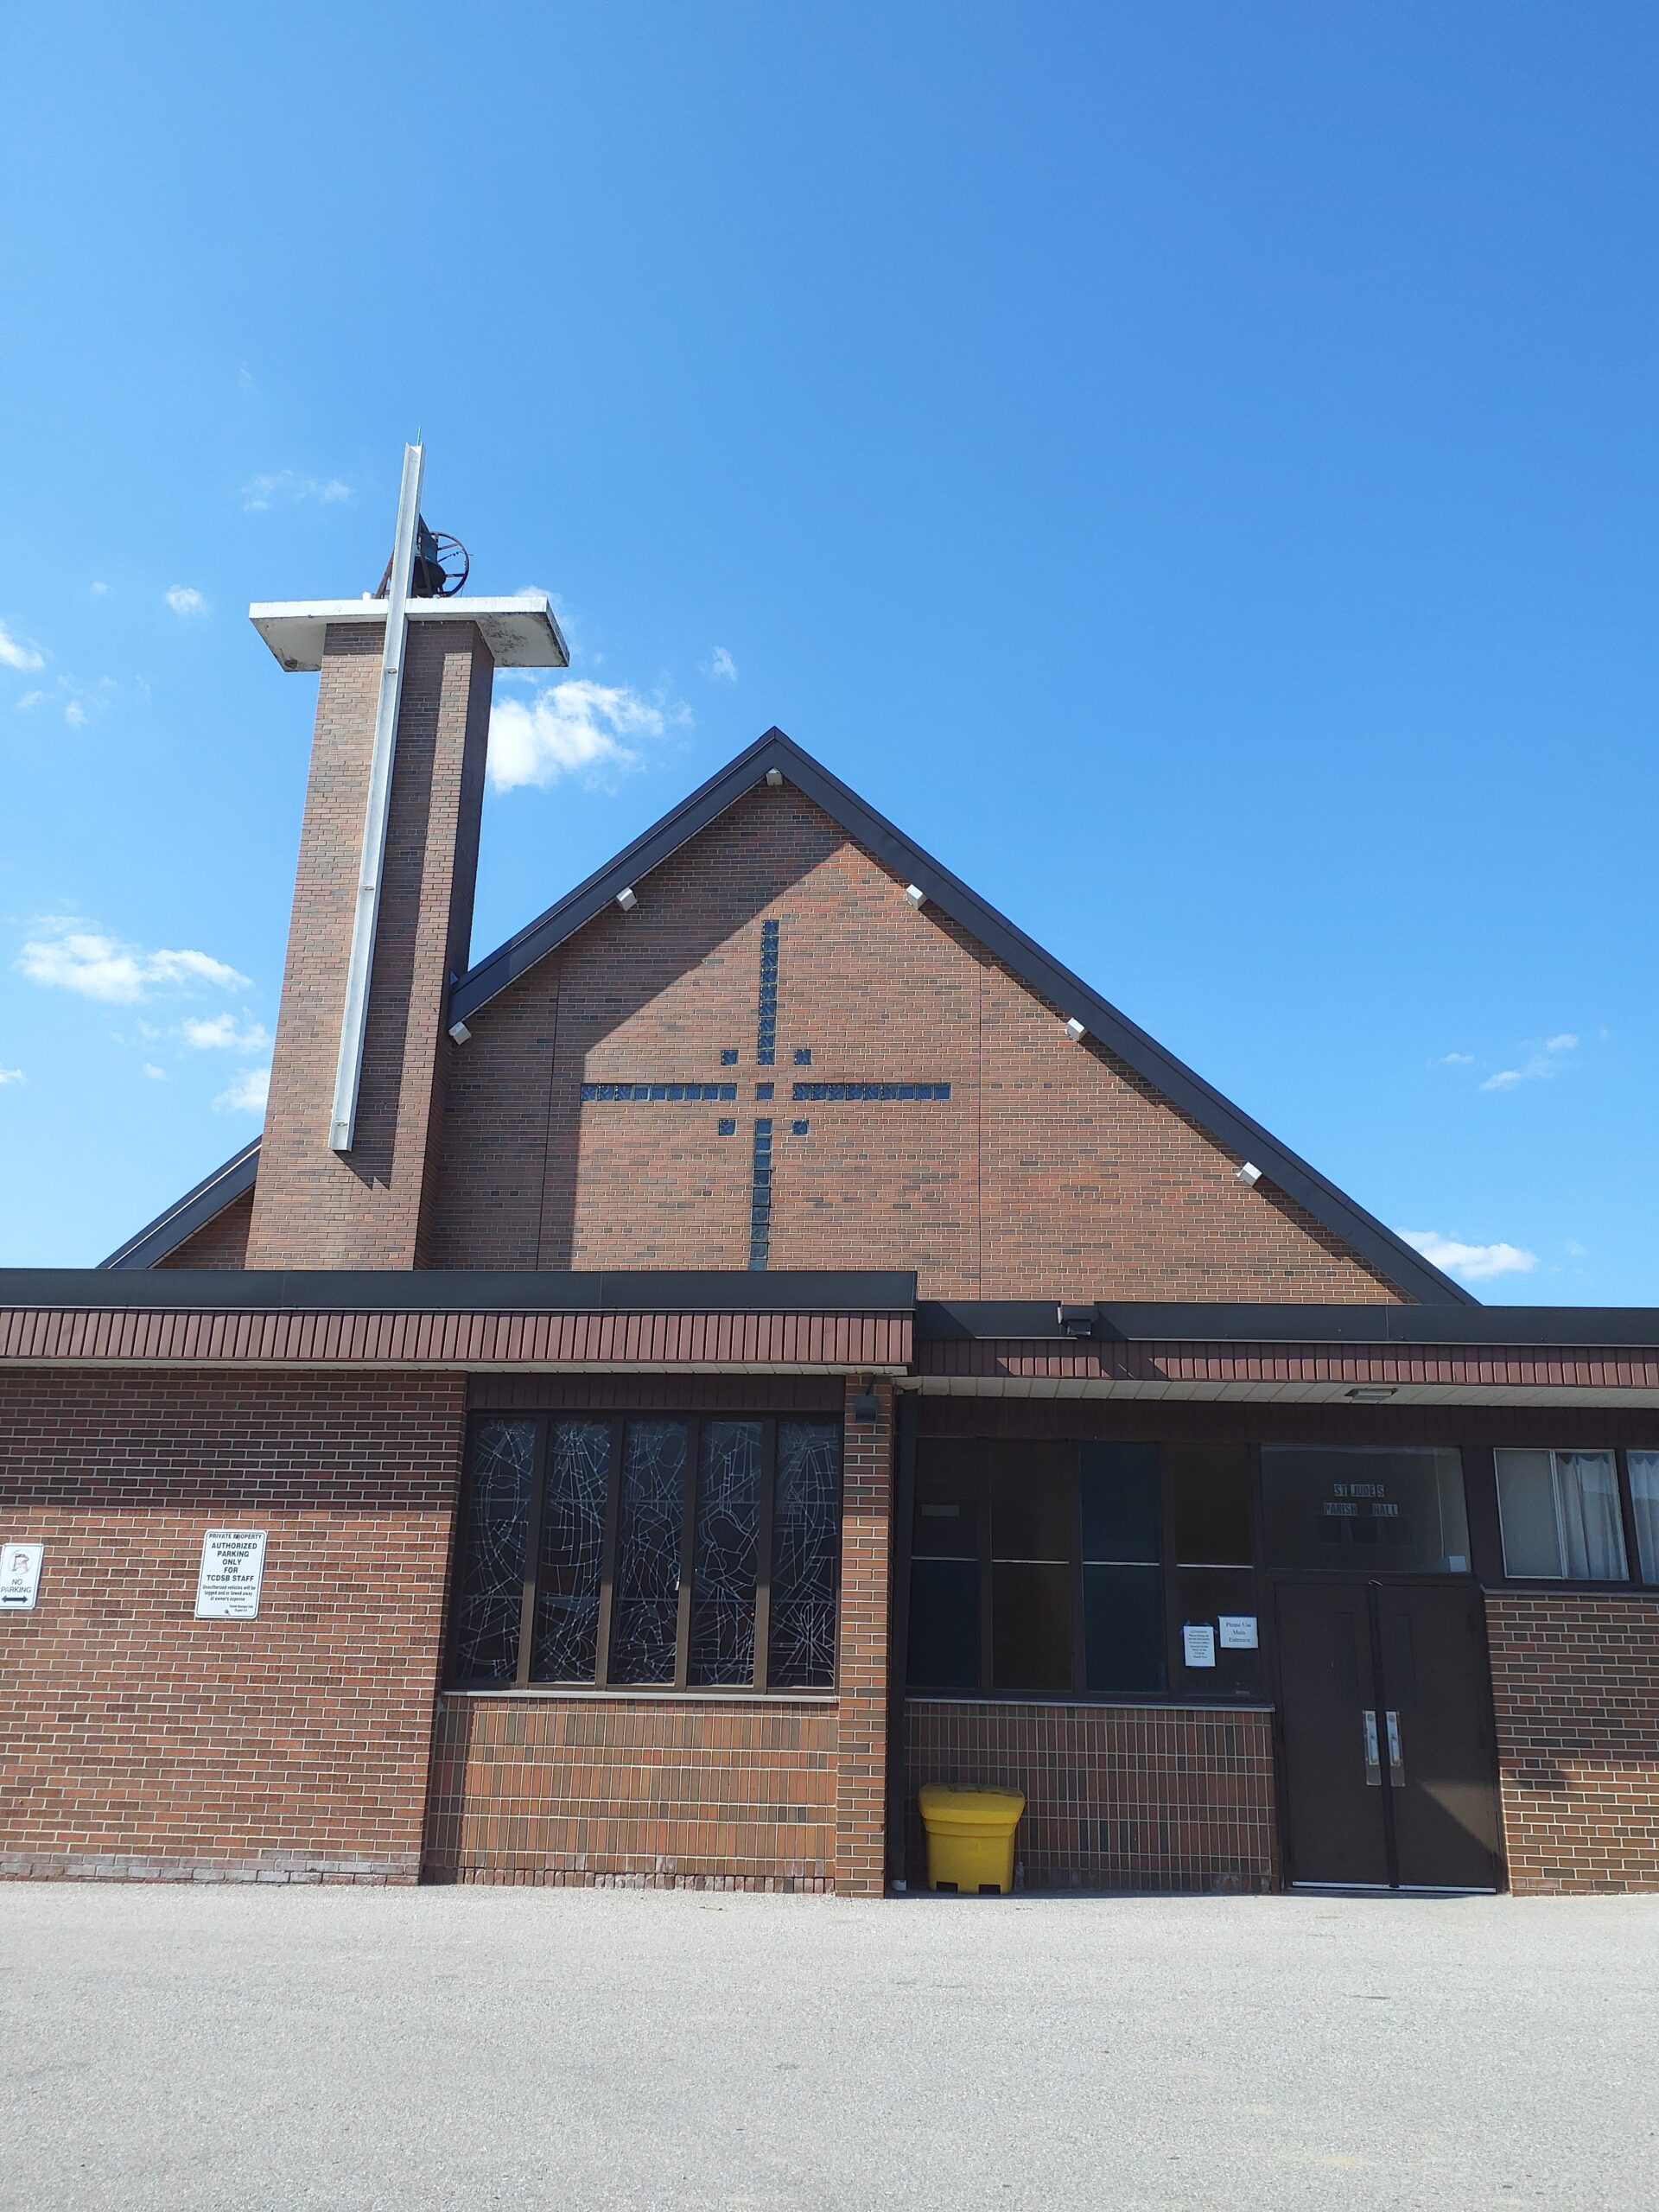 St. Jude's Roman Catholic Church Roofing Project of Triumph Group of Companies